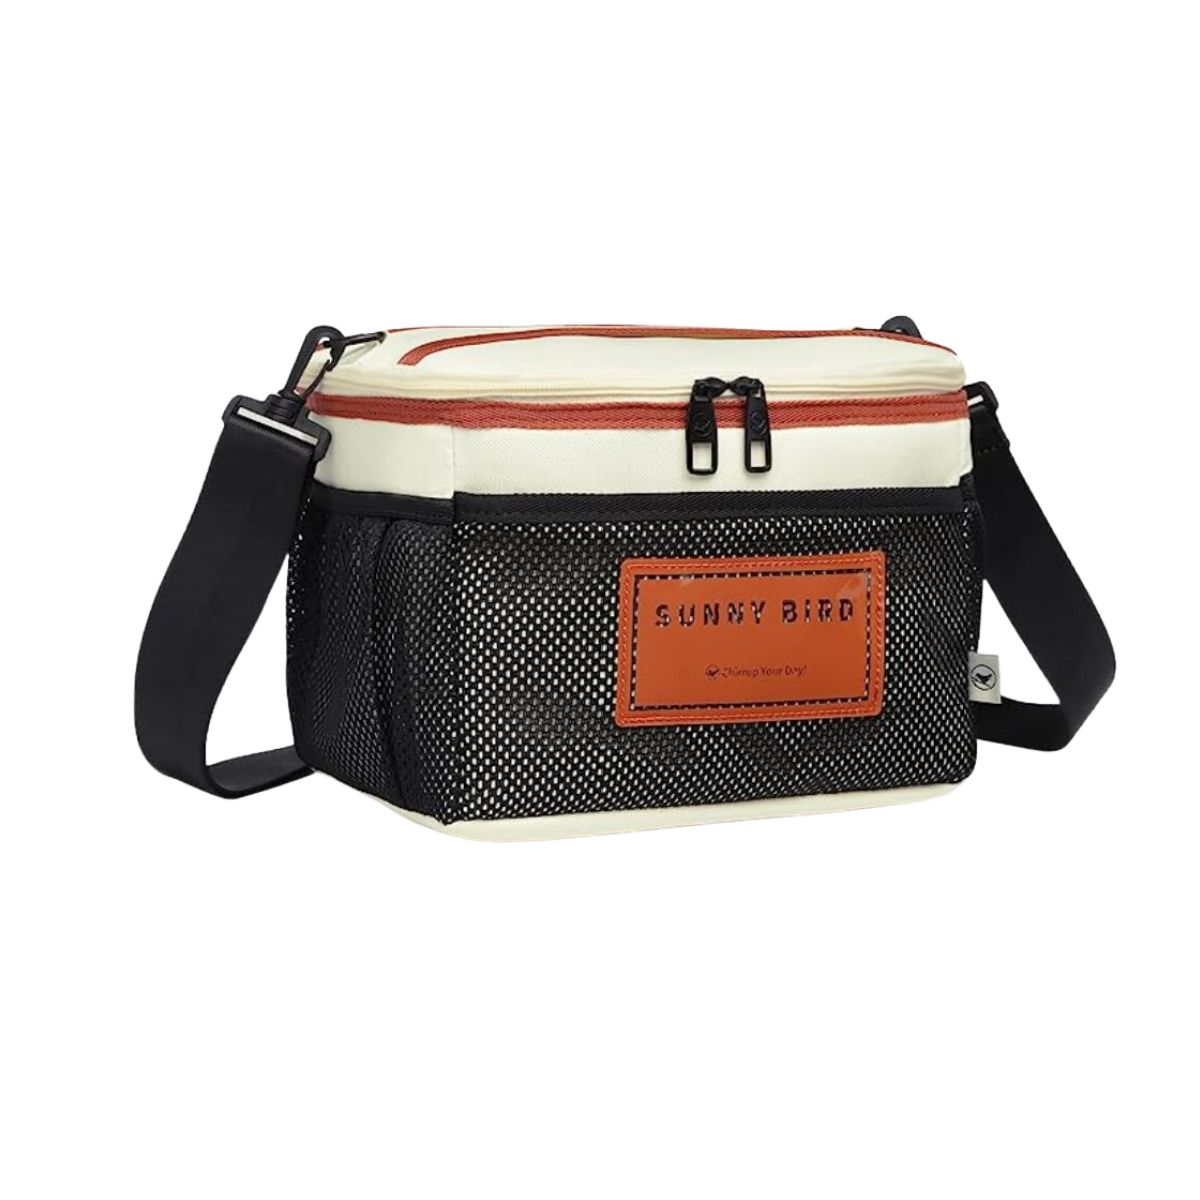 Rectangular insulated lunch box with black straps